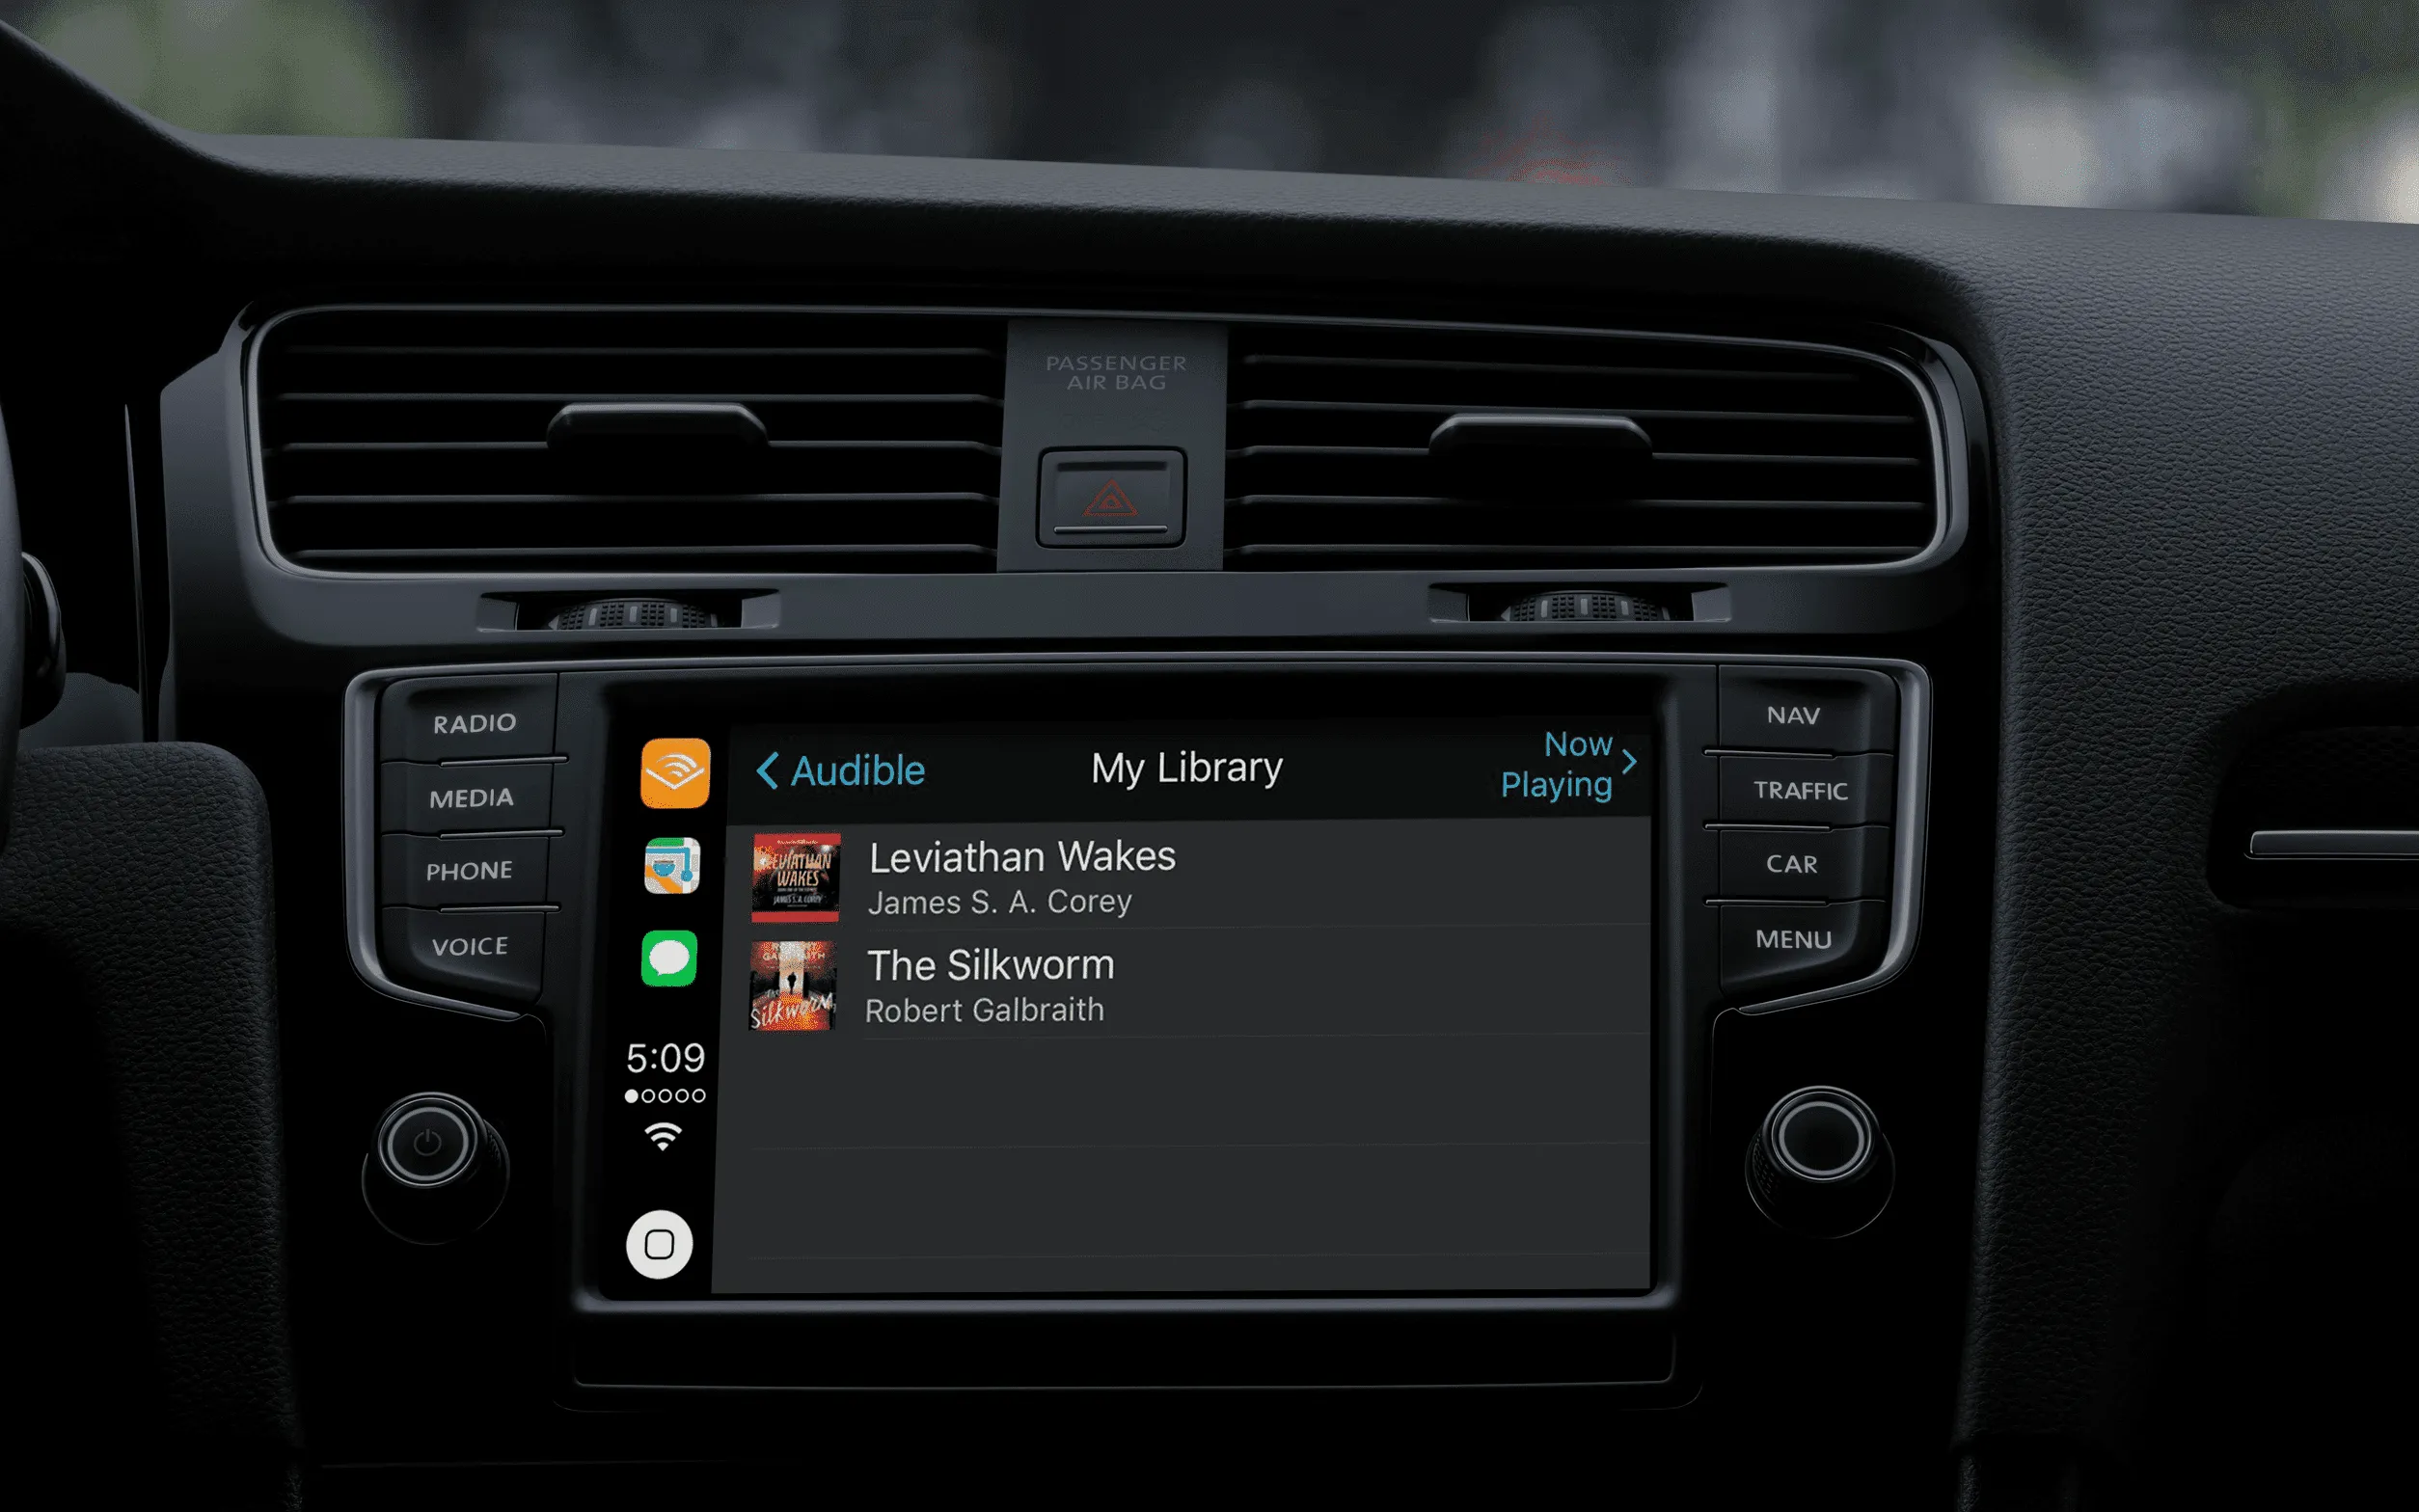 Apps supported by apple CarPlay: Audible